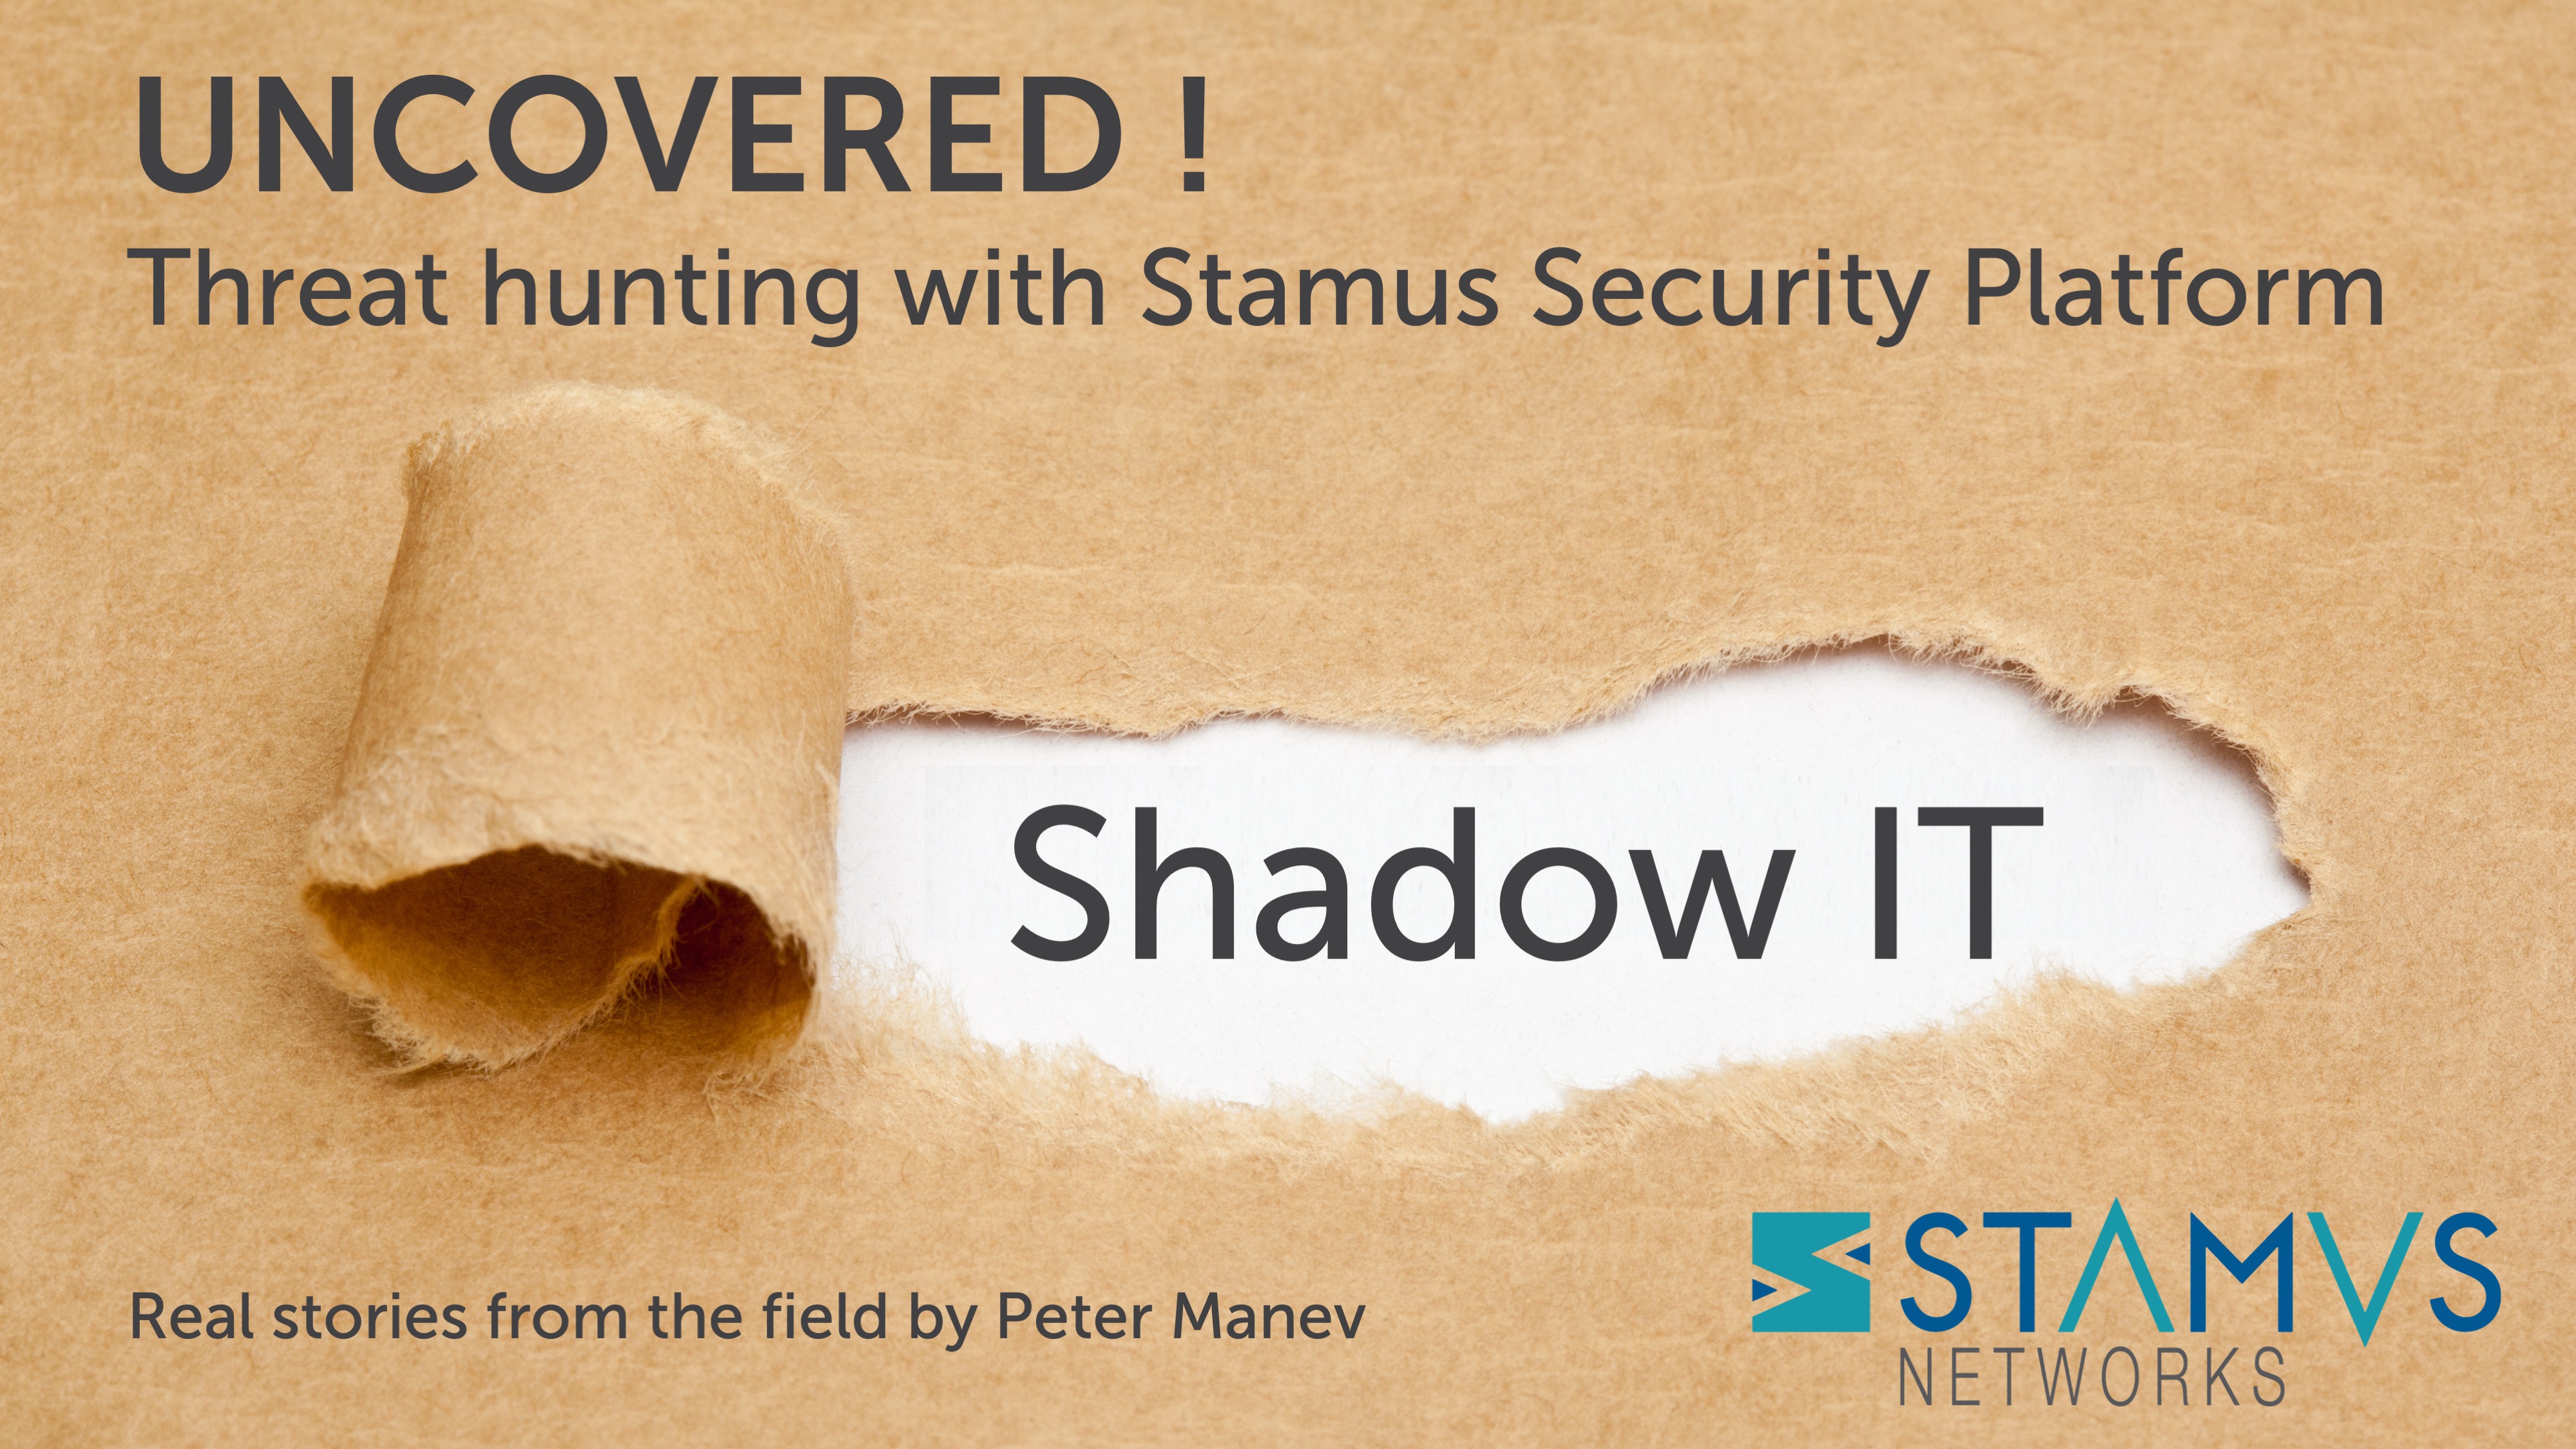 Threat Hunting With Stamus Security Platform: Shadow IT